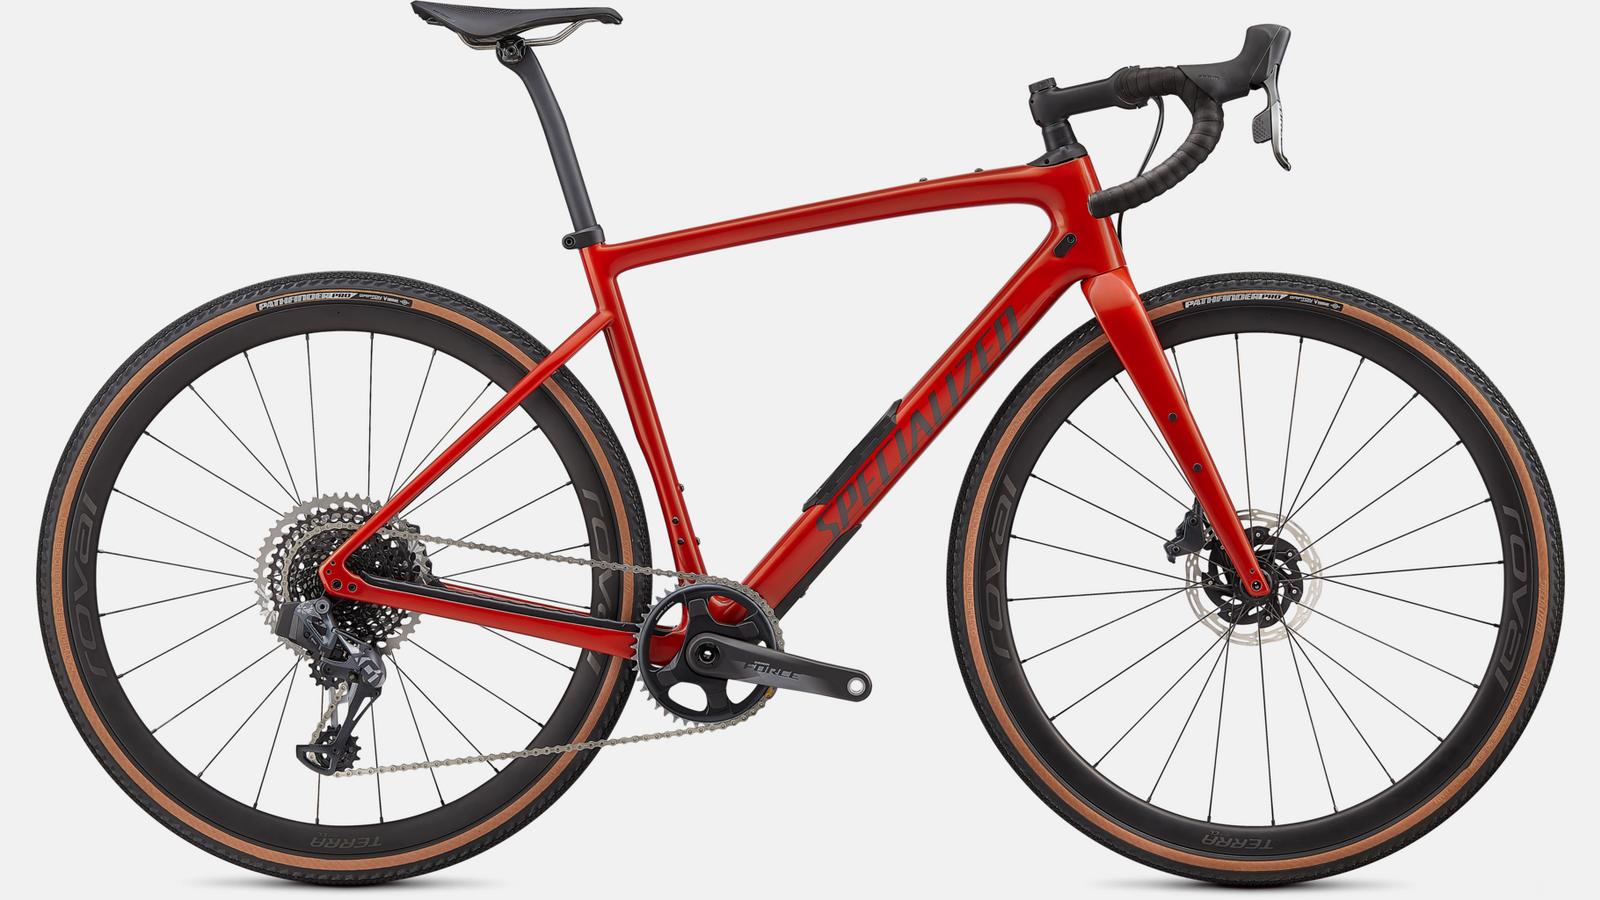 Paint for 2021 Specialized Diverge Pro Carbon - Gloss Redwood